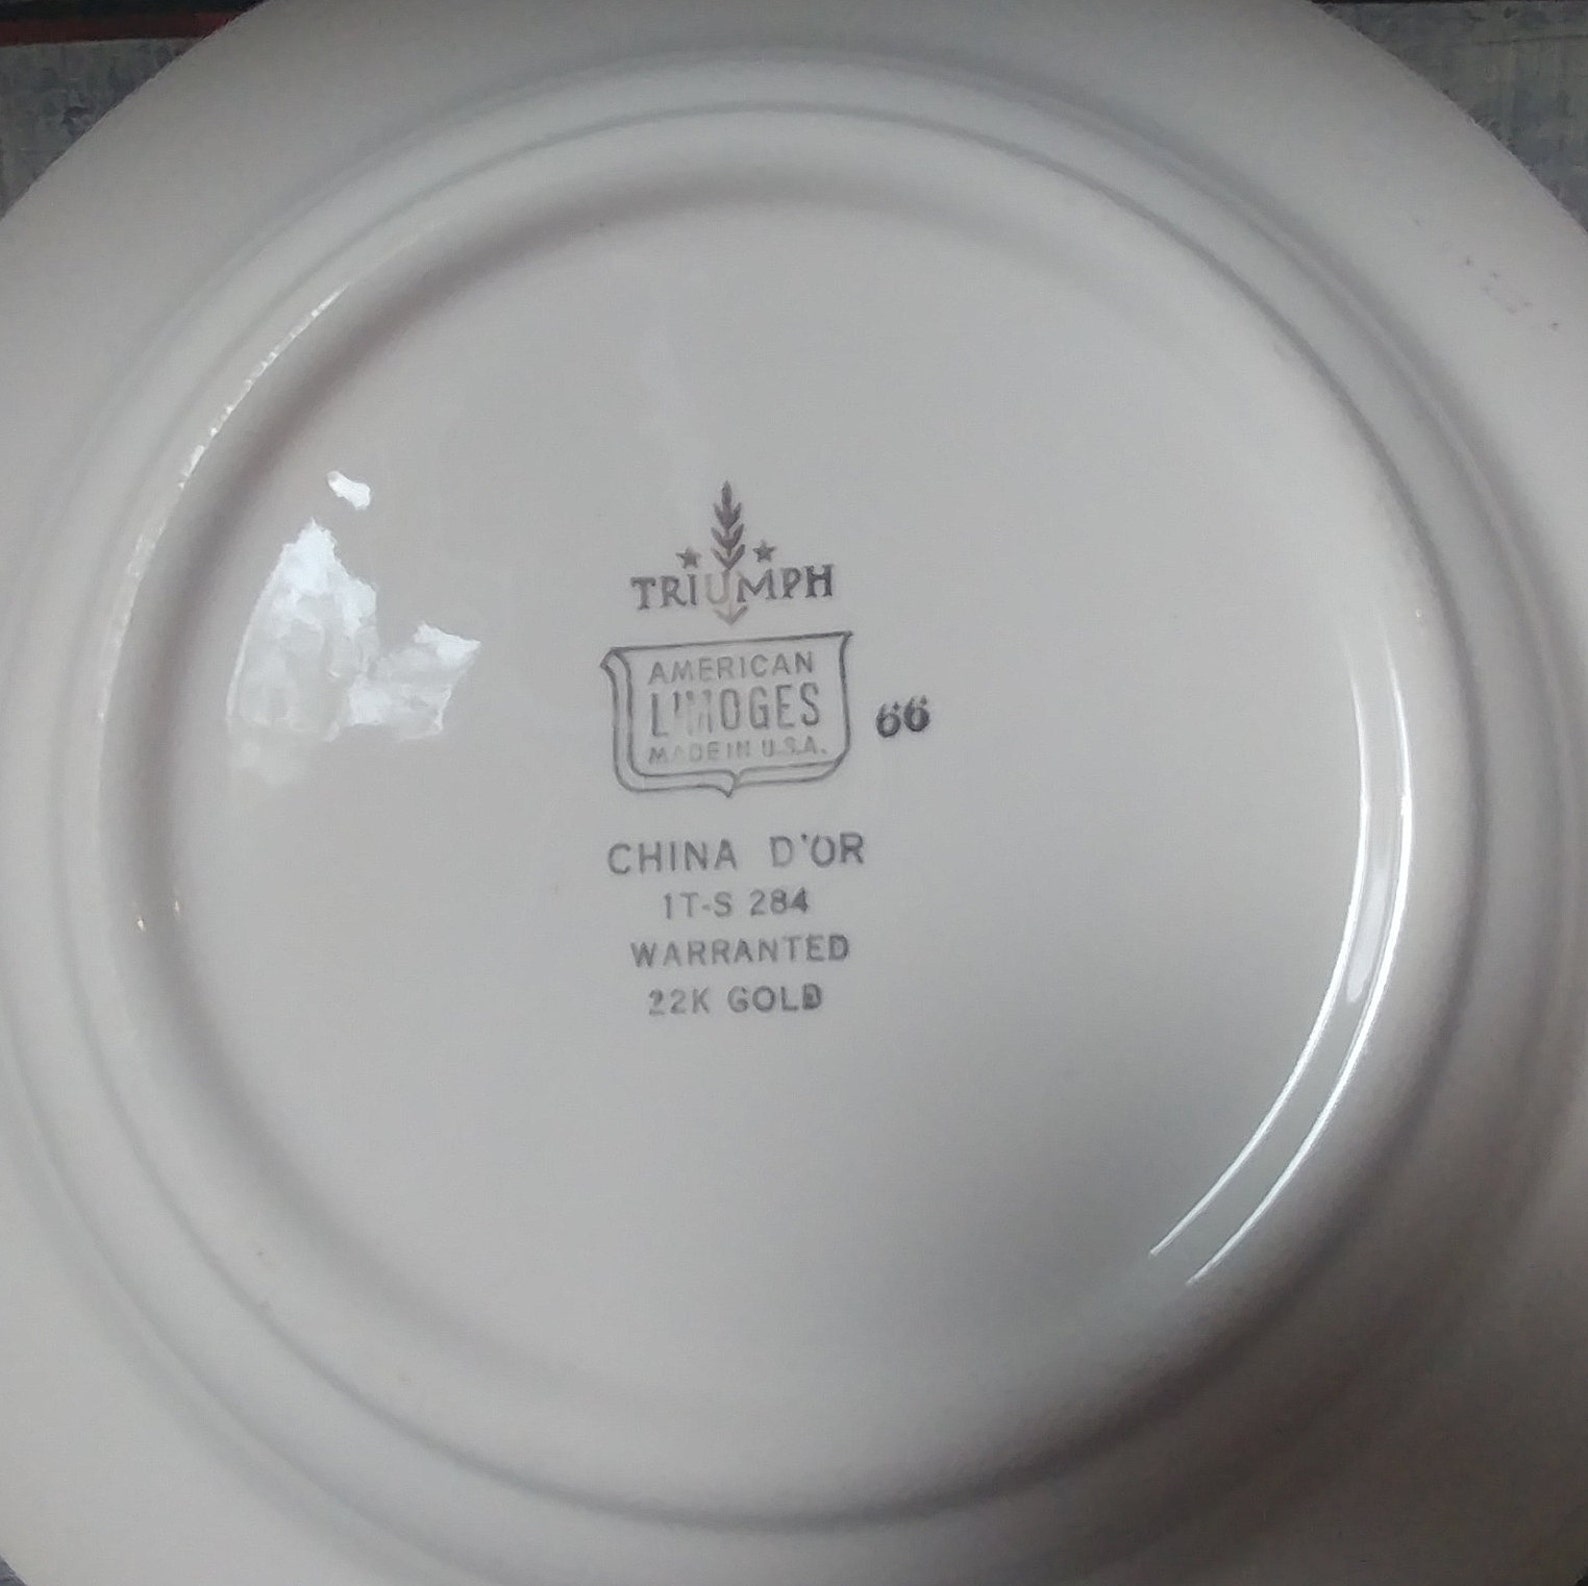 Triumph American Limoges China D' or 1 T-S 284 22kt - Etsy